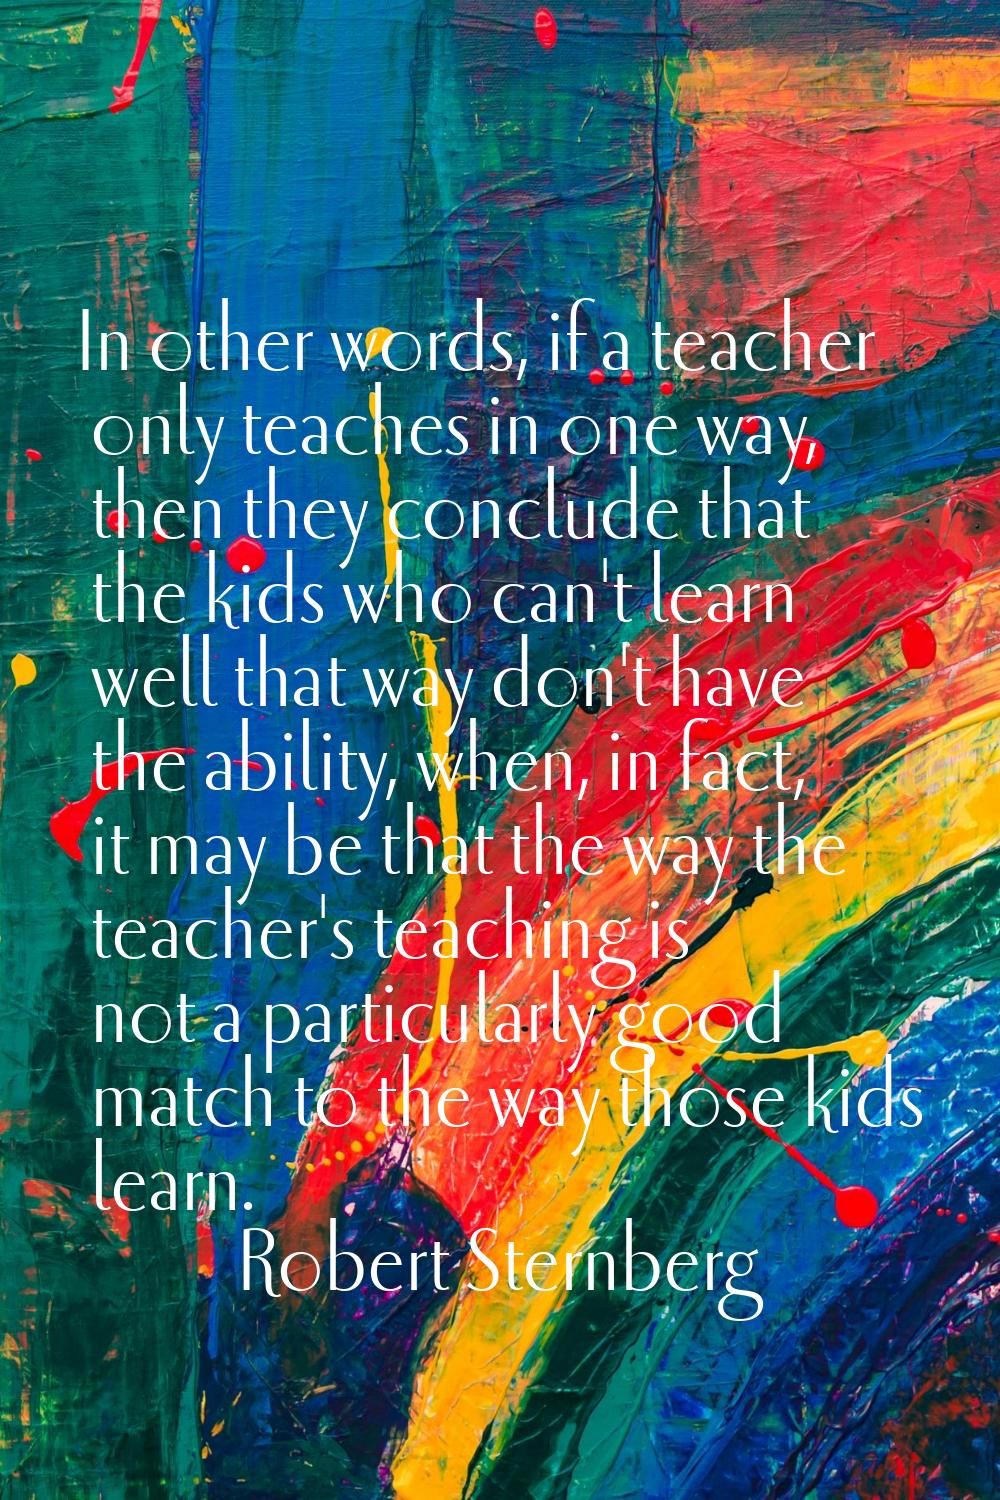 In other words, if a teacher only teaches in one way, then they conclude that the kids who can't le